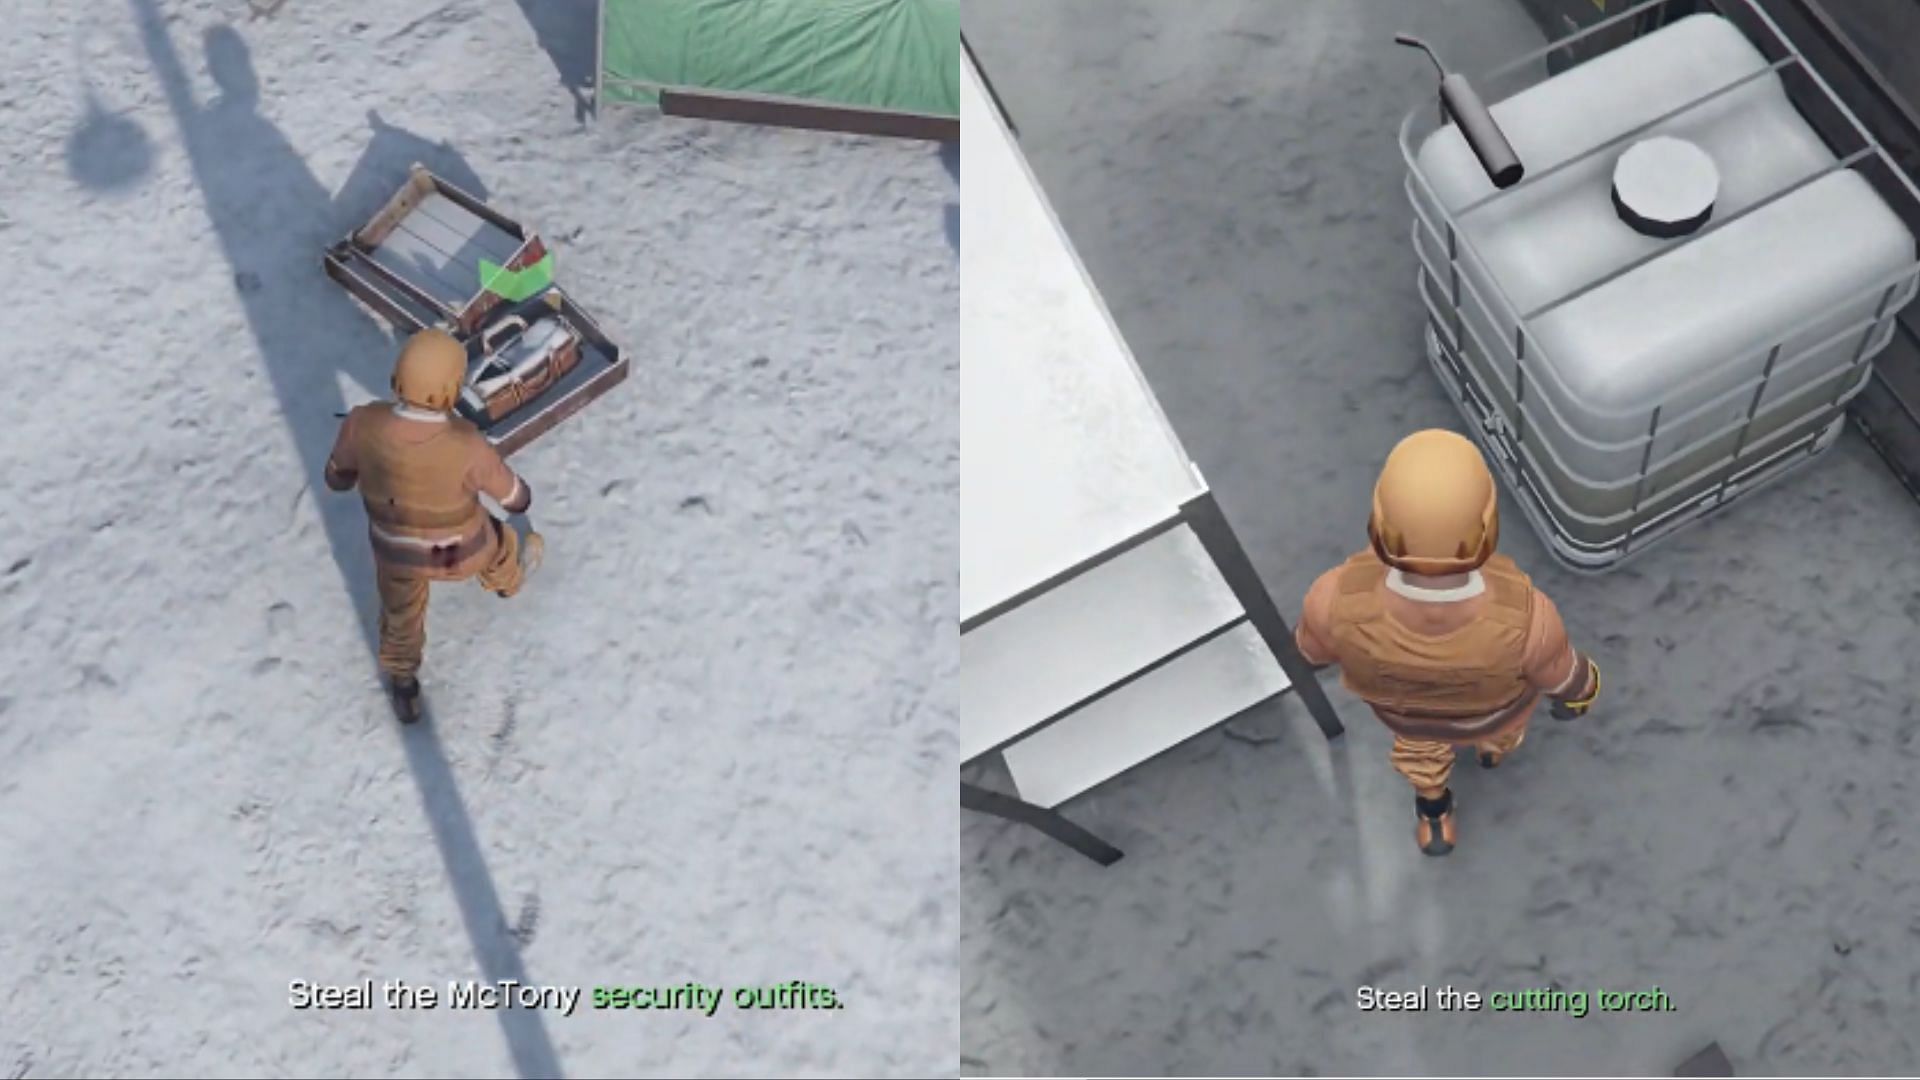 Security clothing and cutting torch (Image via YouTube/GRAVESIGHT)